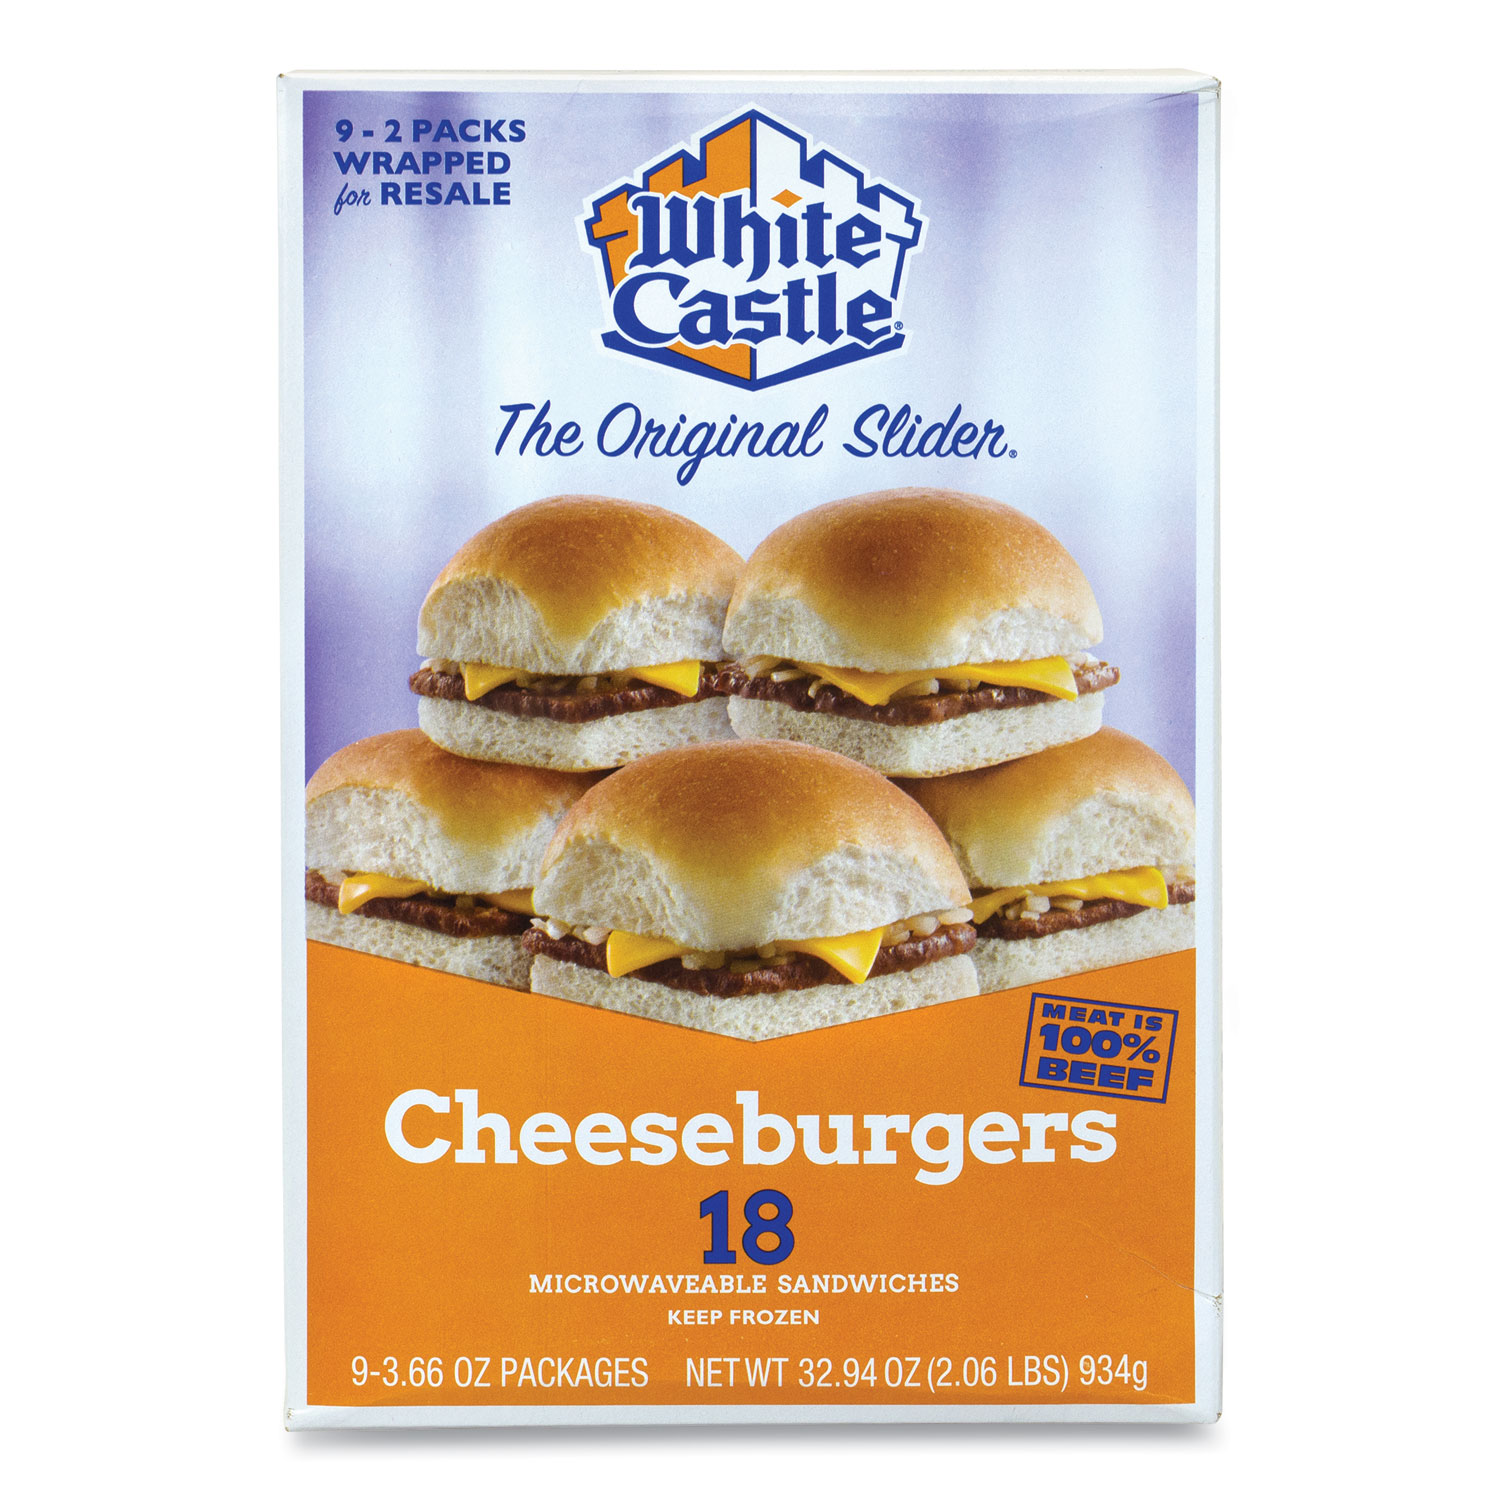  White Castle 801018 Cheeseburger Sliders, 3.66 oz Pack, 2 Burgers/Pack, 9 Packs/Box, Free Delivery in 1-4 Business Days (GRR90300065) 